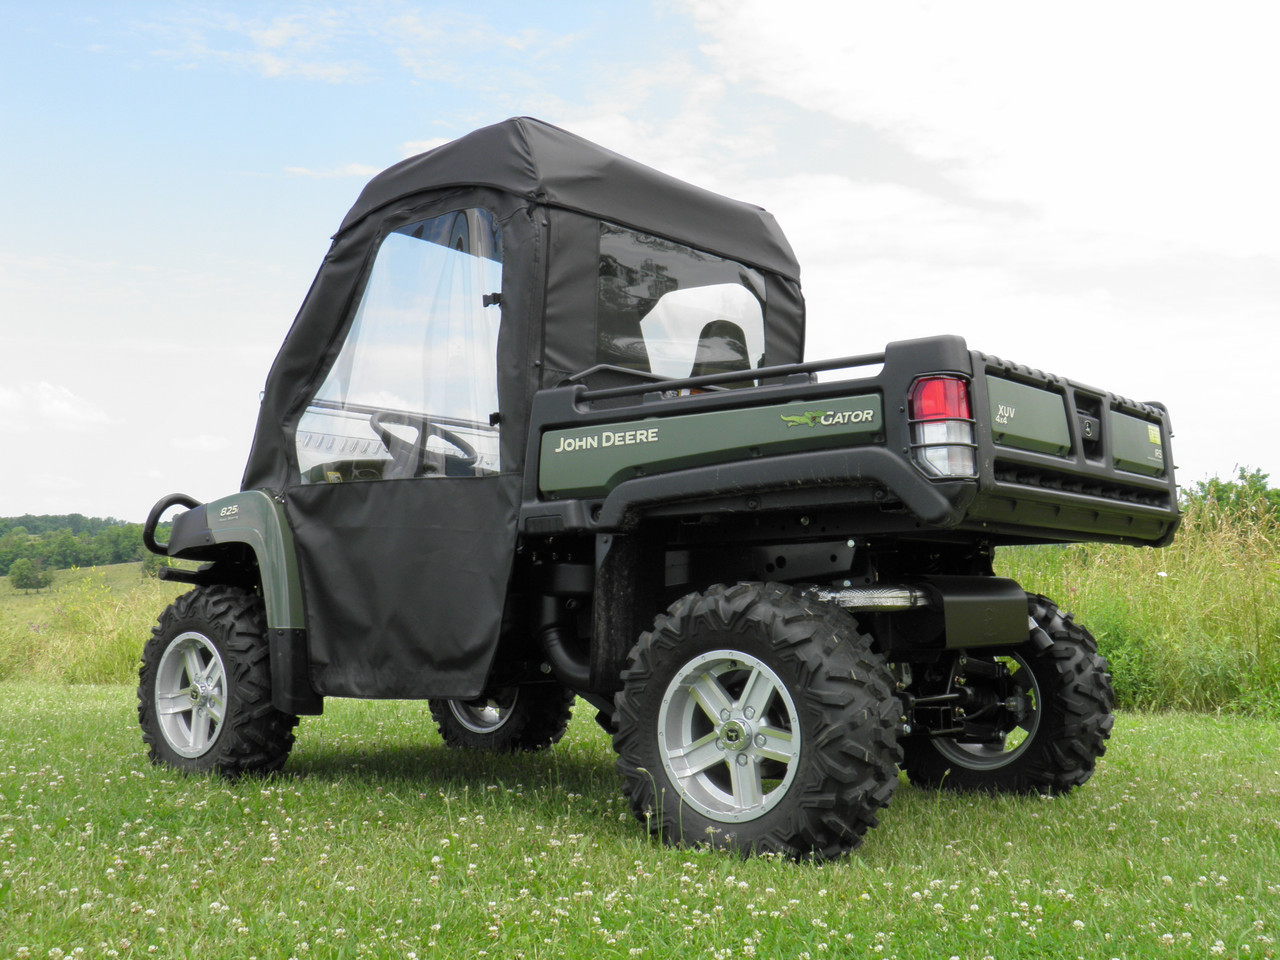 3 Star side x side John Deere HPX/XUV full cab enclosure rear angle view